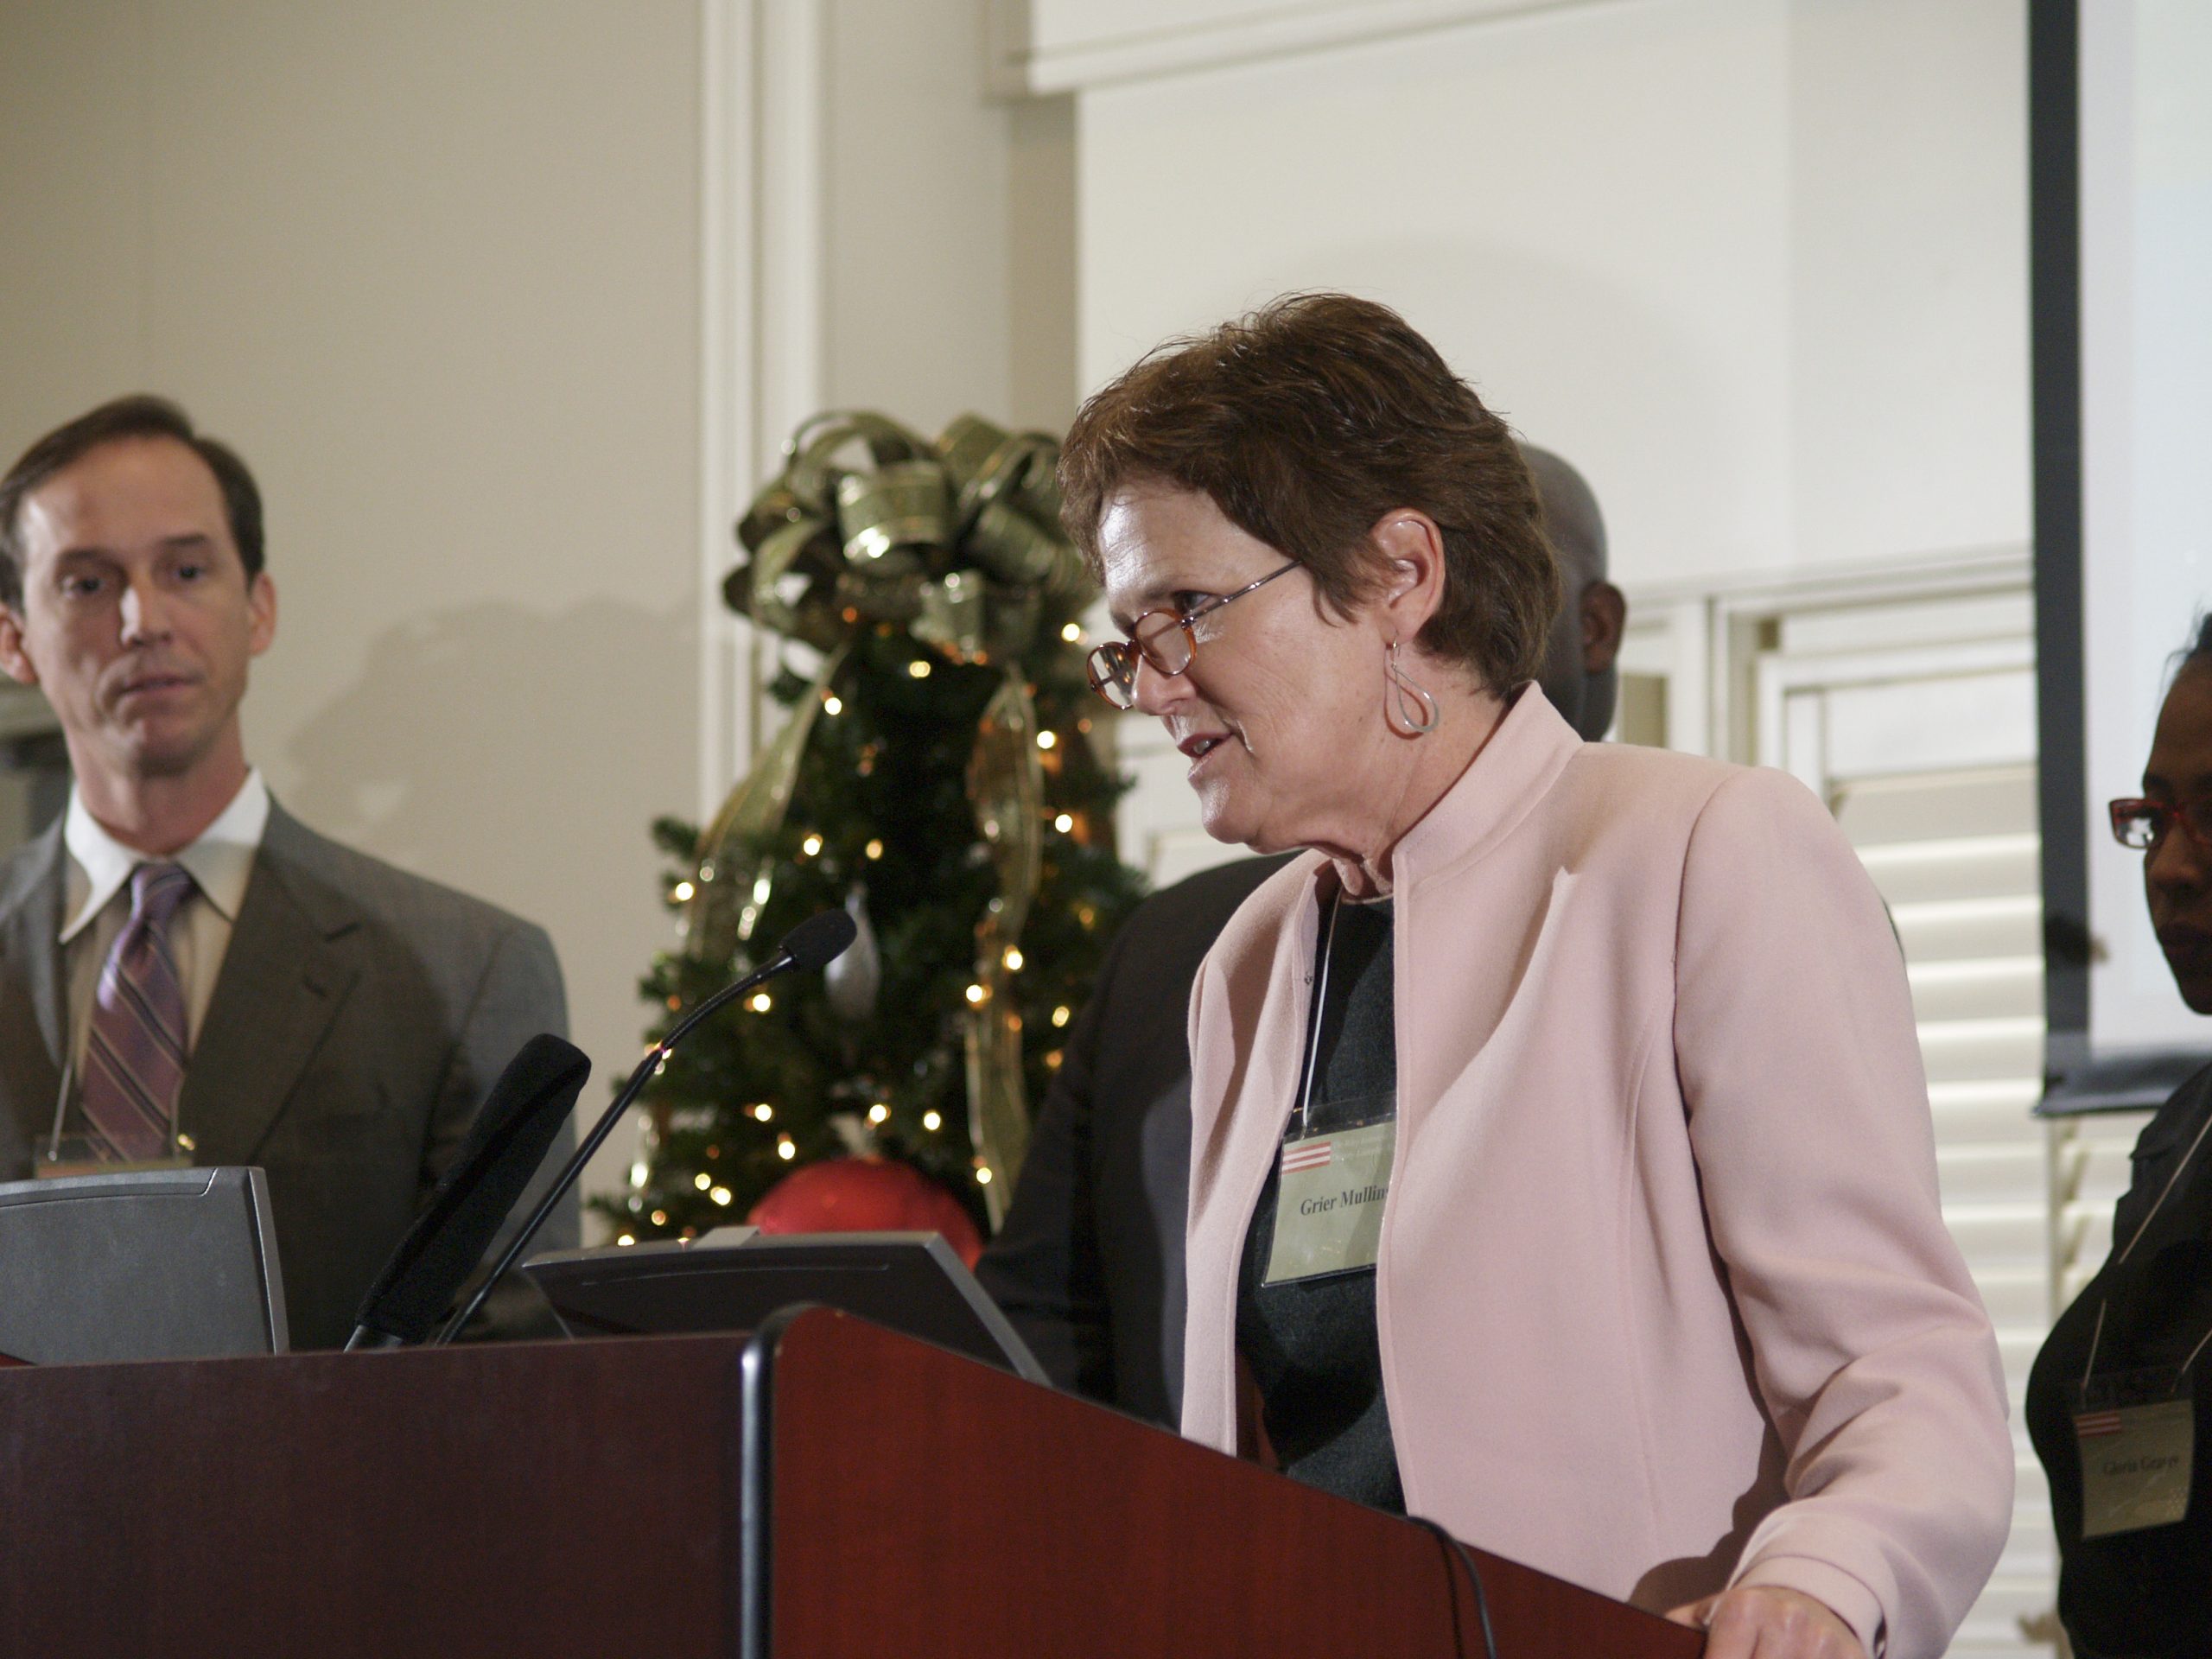 (l-r) David Moody and Grier Mullins presenting